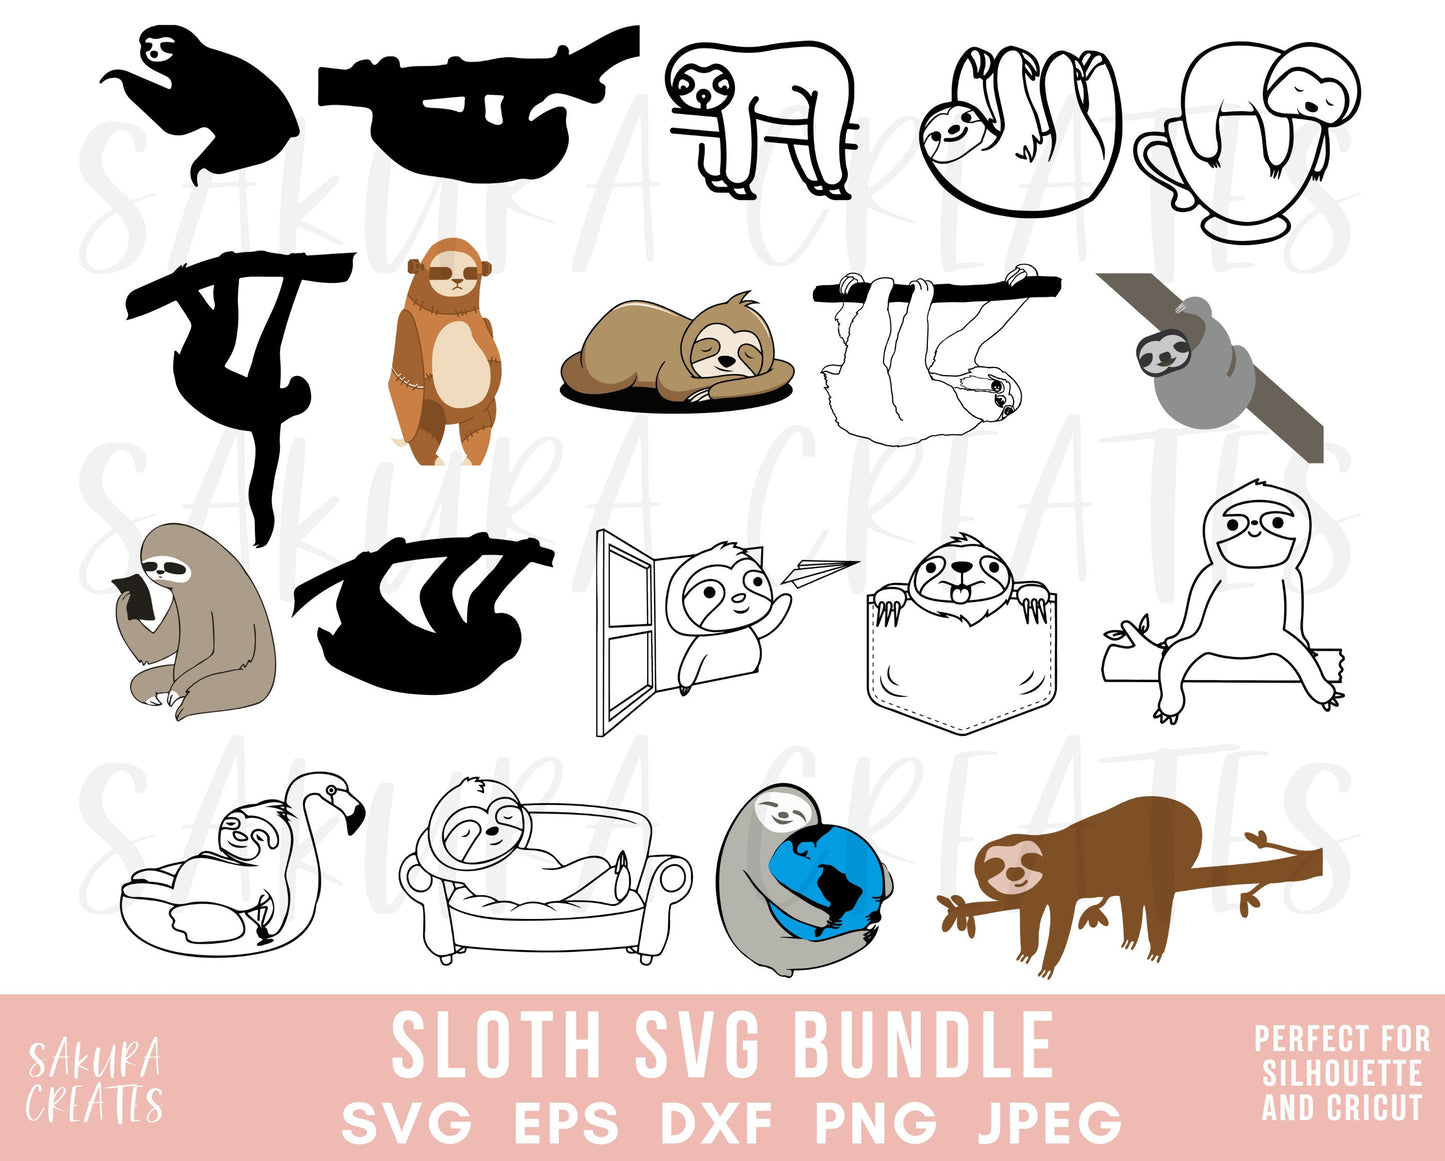 Sloth SVG Cute Sloth clipart Sleeping Hanging sloth Cut file Sloth Layered Cutting Vinyl Cricut Silhouette Commercial use Instant download